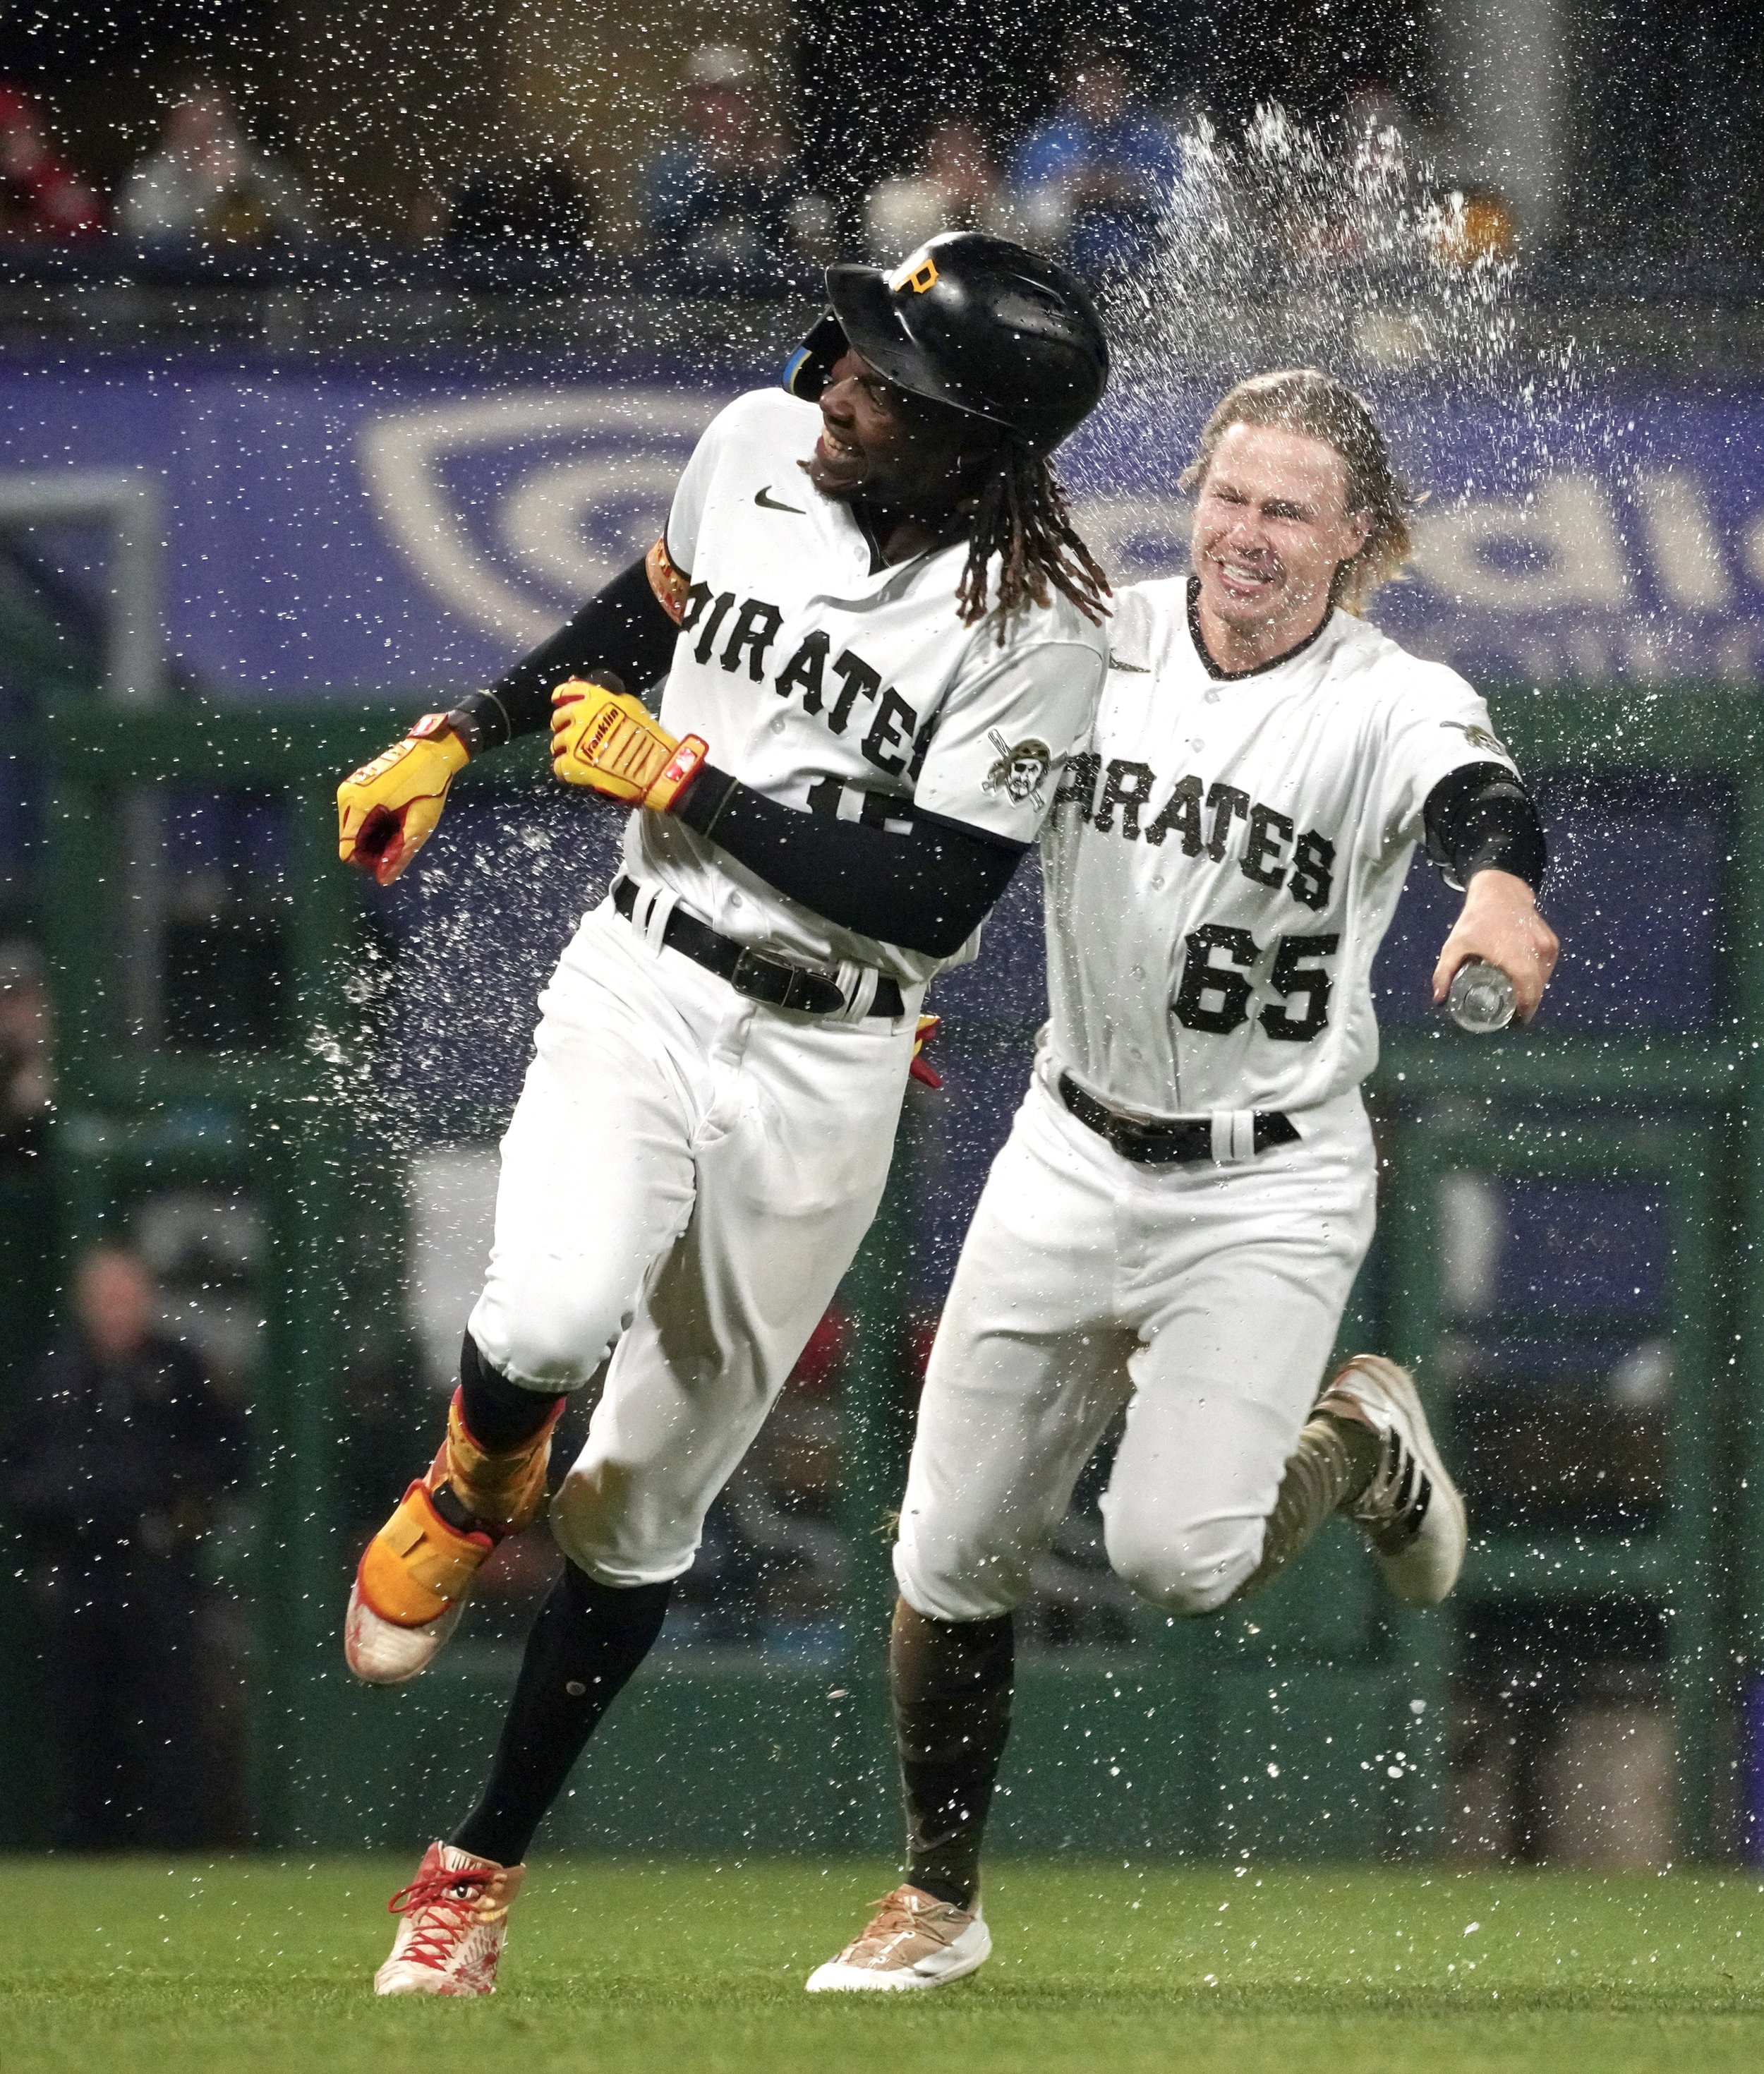  The Pirates' Oneil Cruz runs away from Jack Suwinski as Suwinski sprays him with water after their 3-2 win against the Cardinals on Monday, October 3, 2022, at PNC Park in Pittsburgh. Cruz was walked with bases loaded to end the game. (Emily Matthew